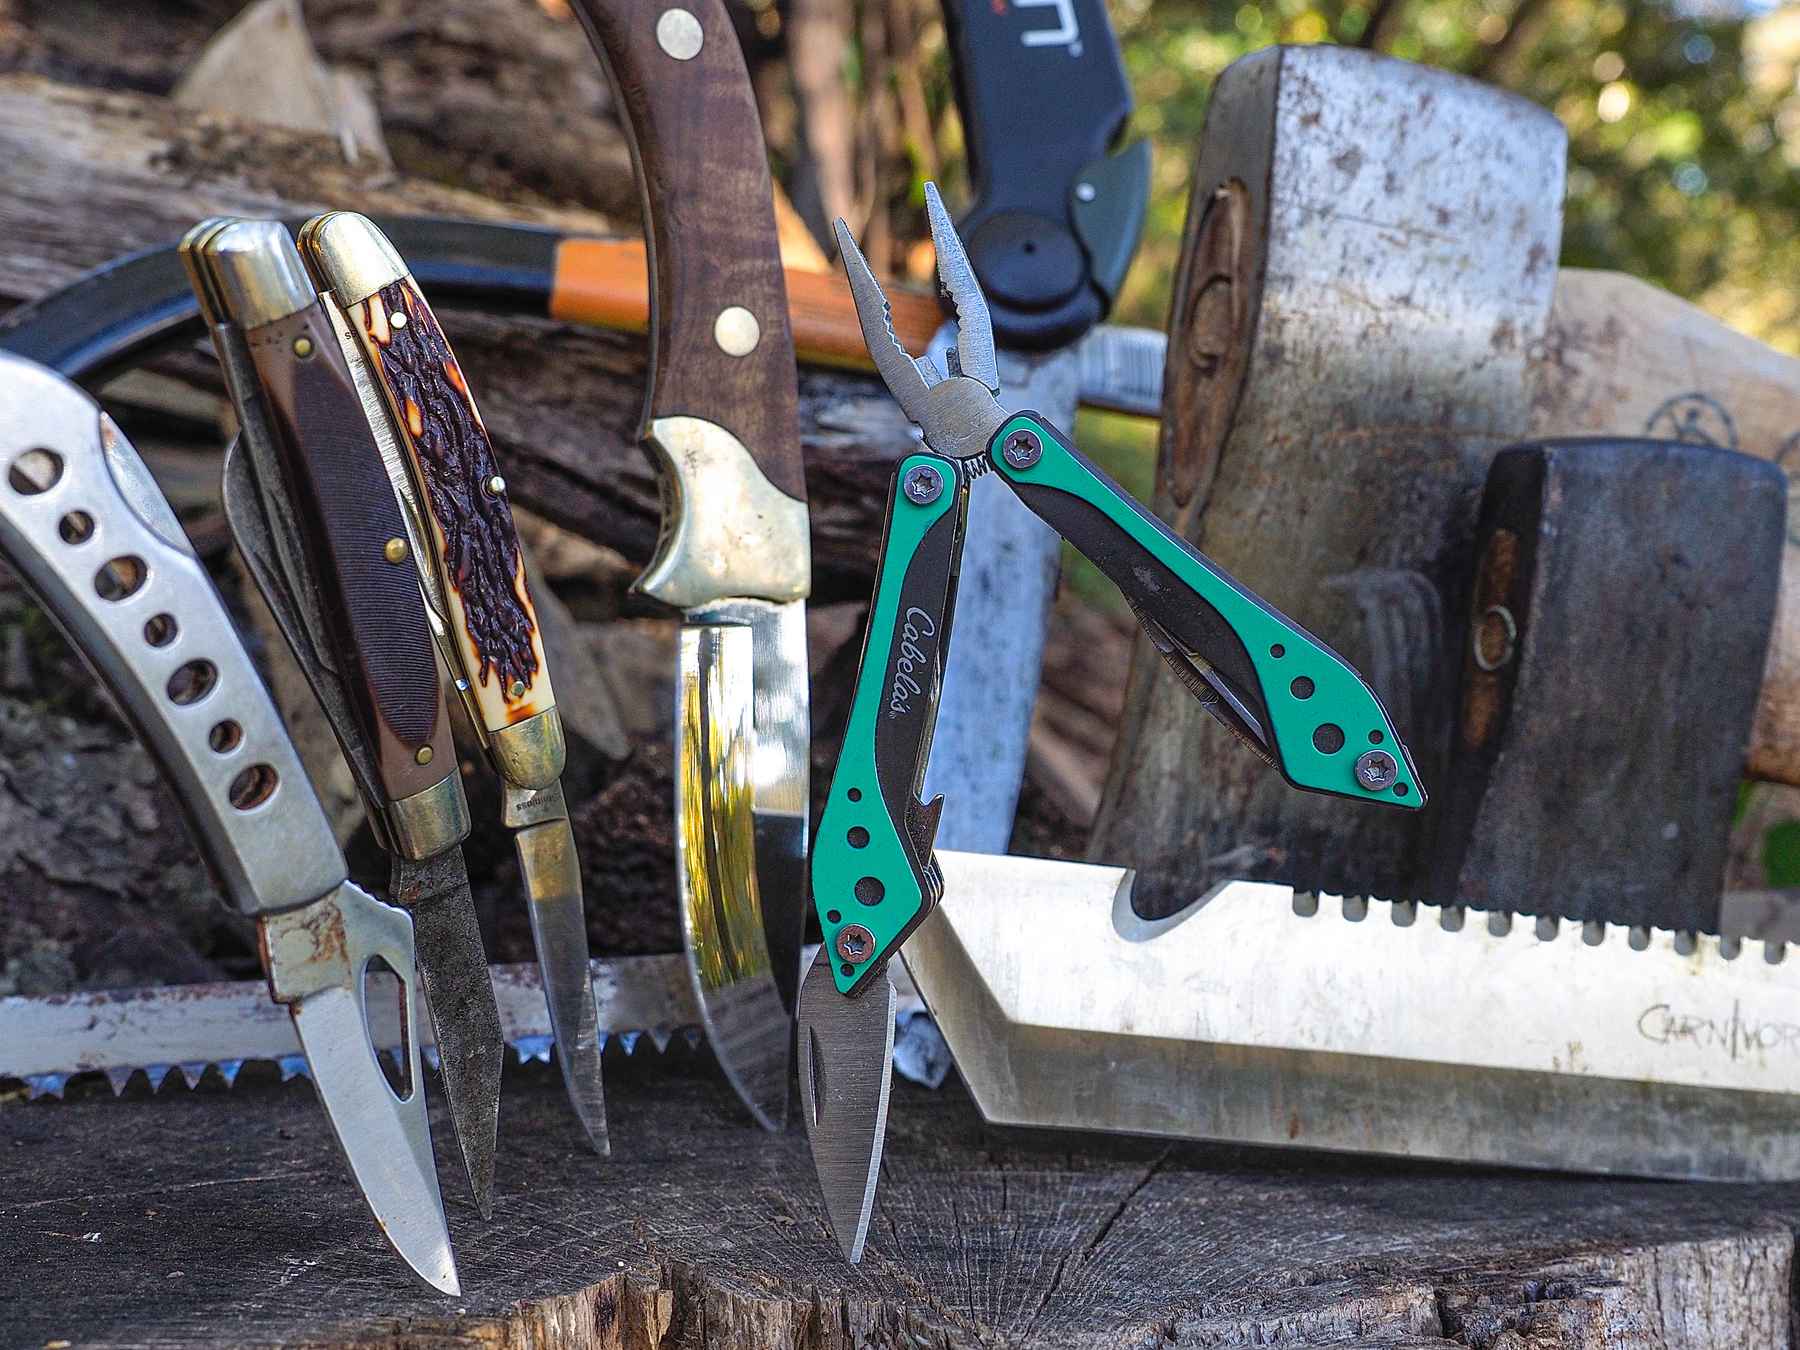 The basics of cutting tools: Pocket knives, fixed blades, hatchets, axes,  machetes, saws and more